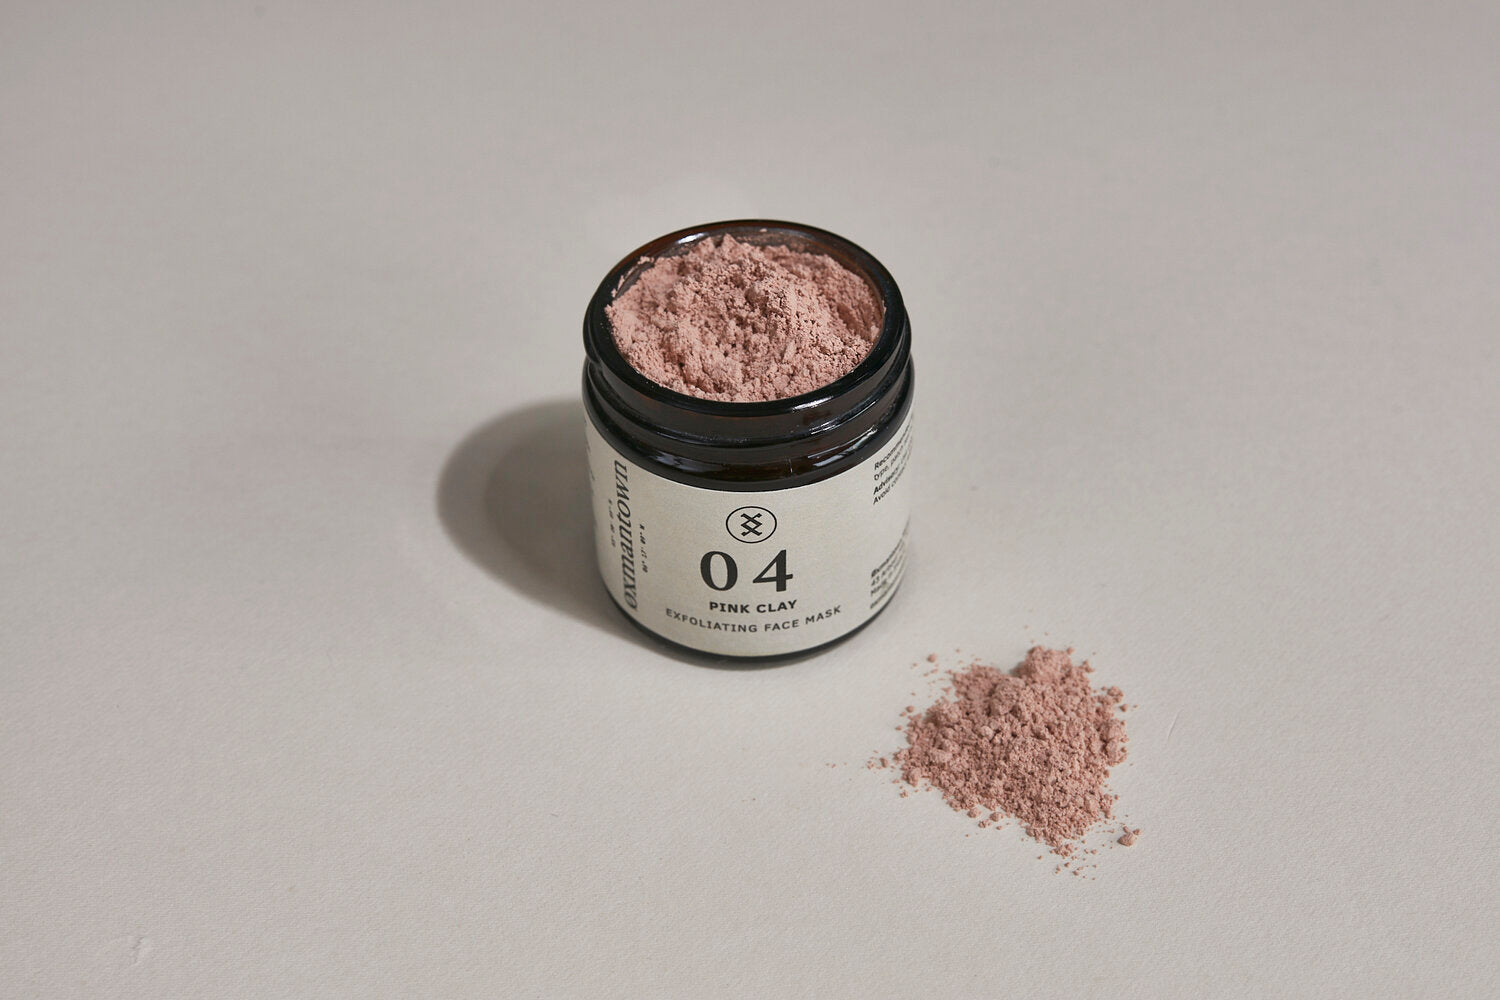 04 Pink Clay Exfoliating Face Mask - Collected